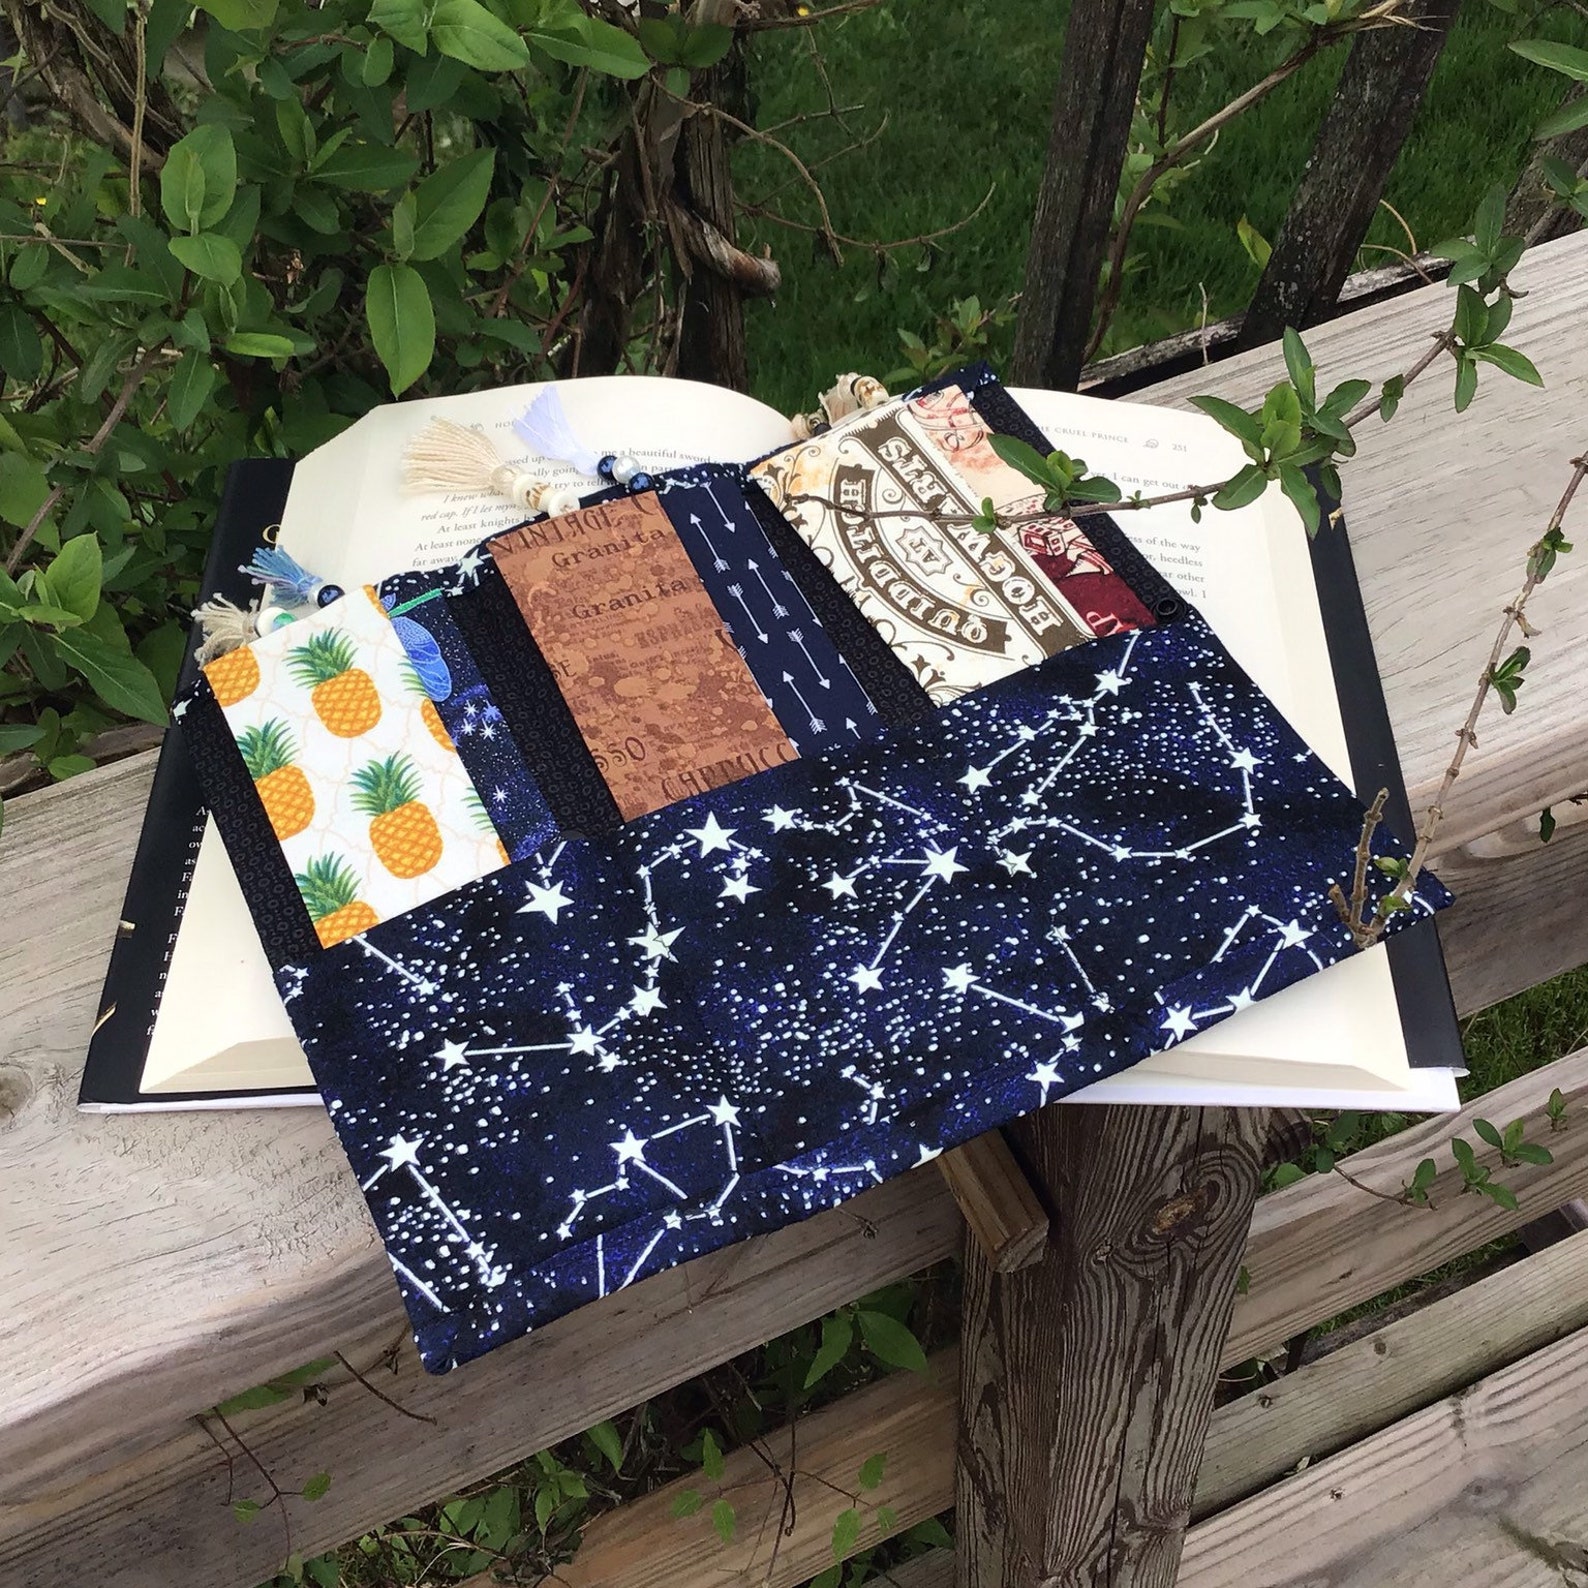 A cloth organizer with three pockets for bookmarks, in a constellation print.